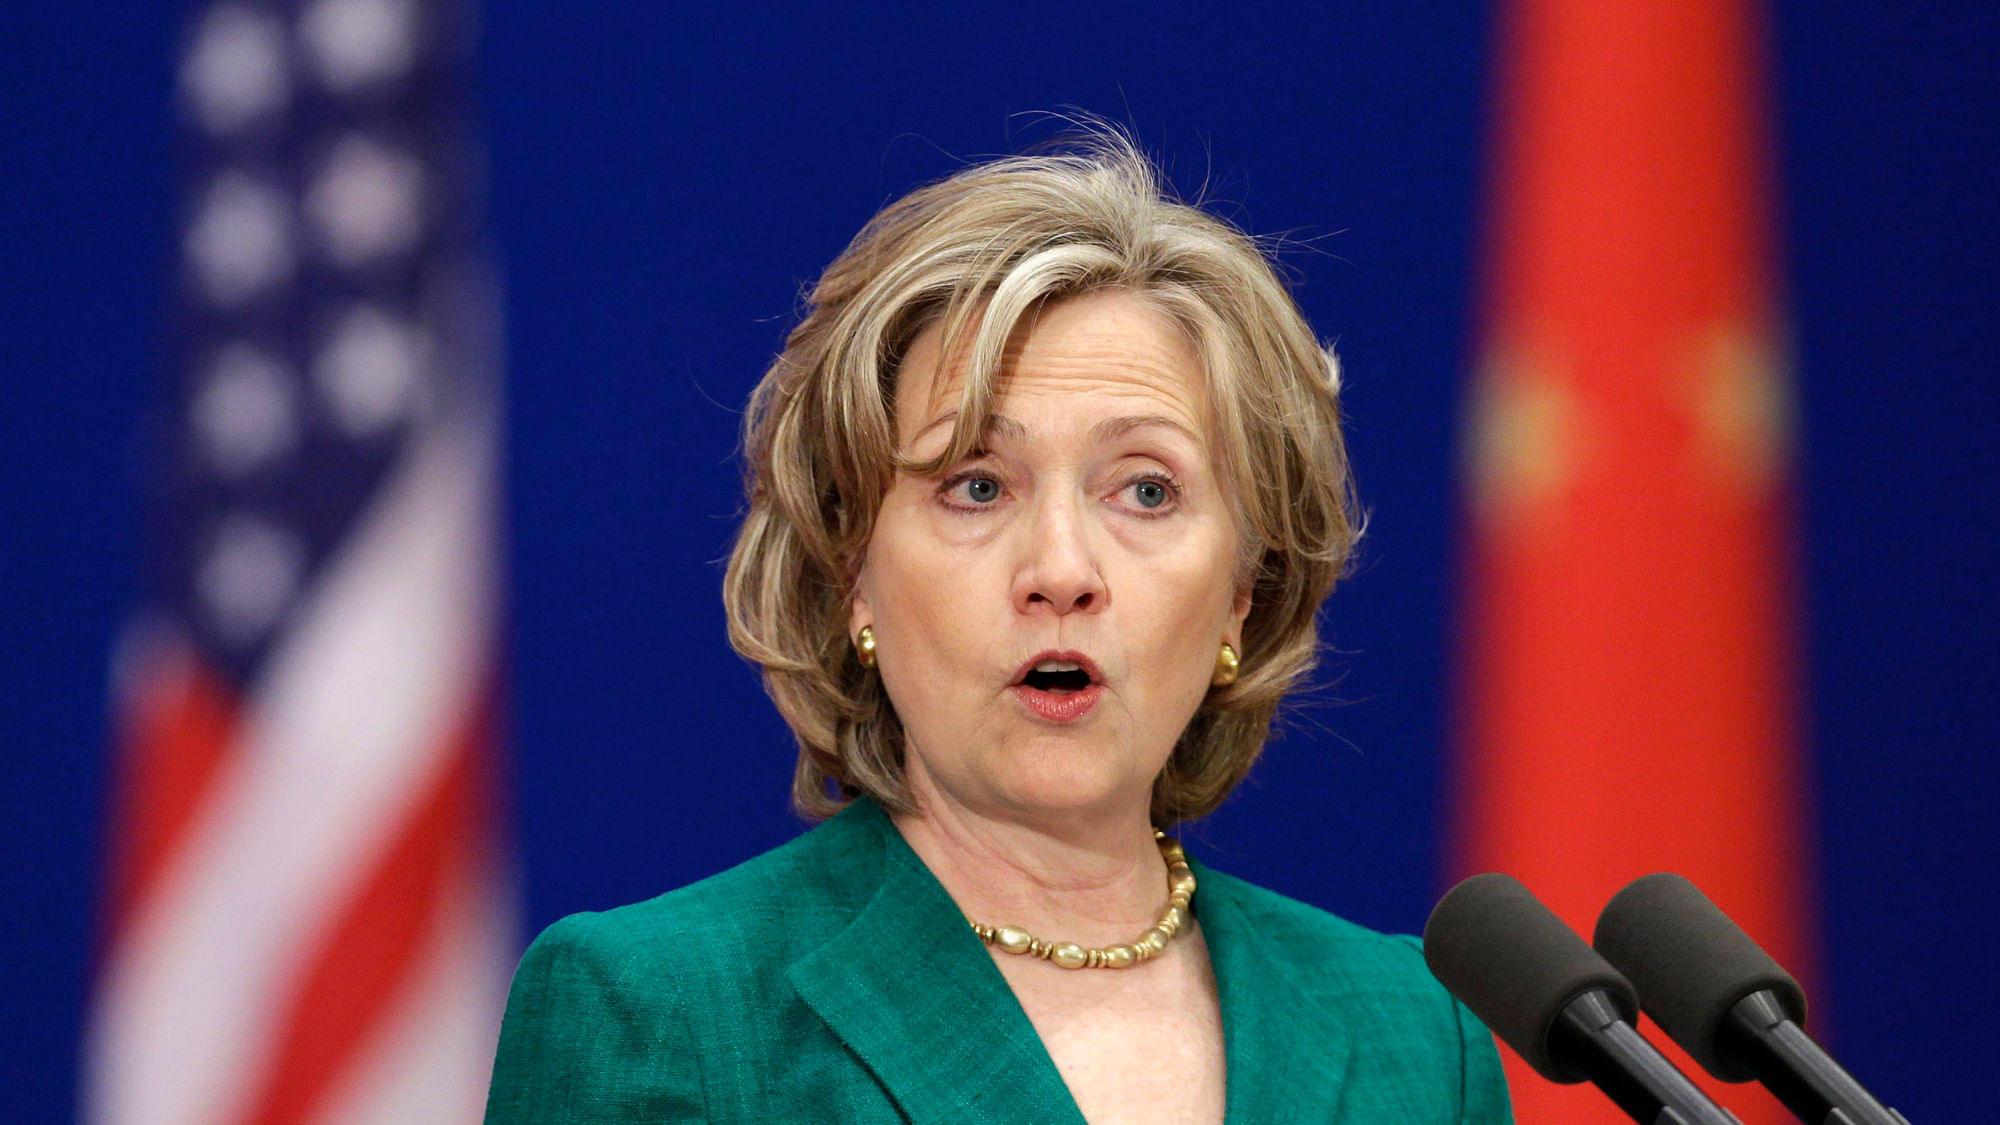 Hillary Clinton speaking in 2010. (Photo: Reuters)